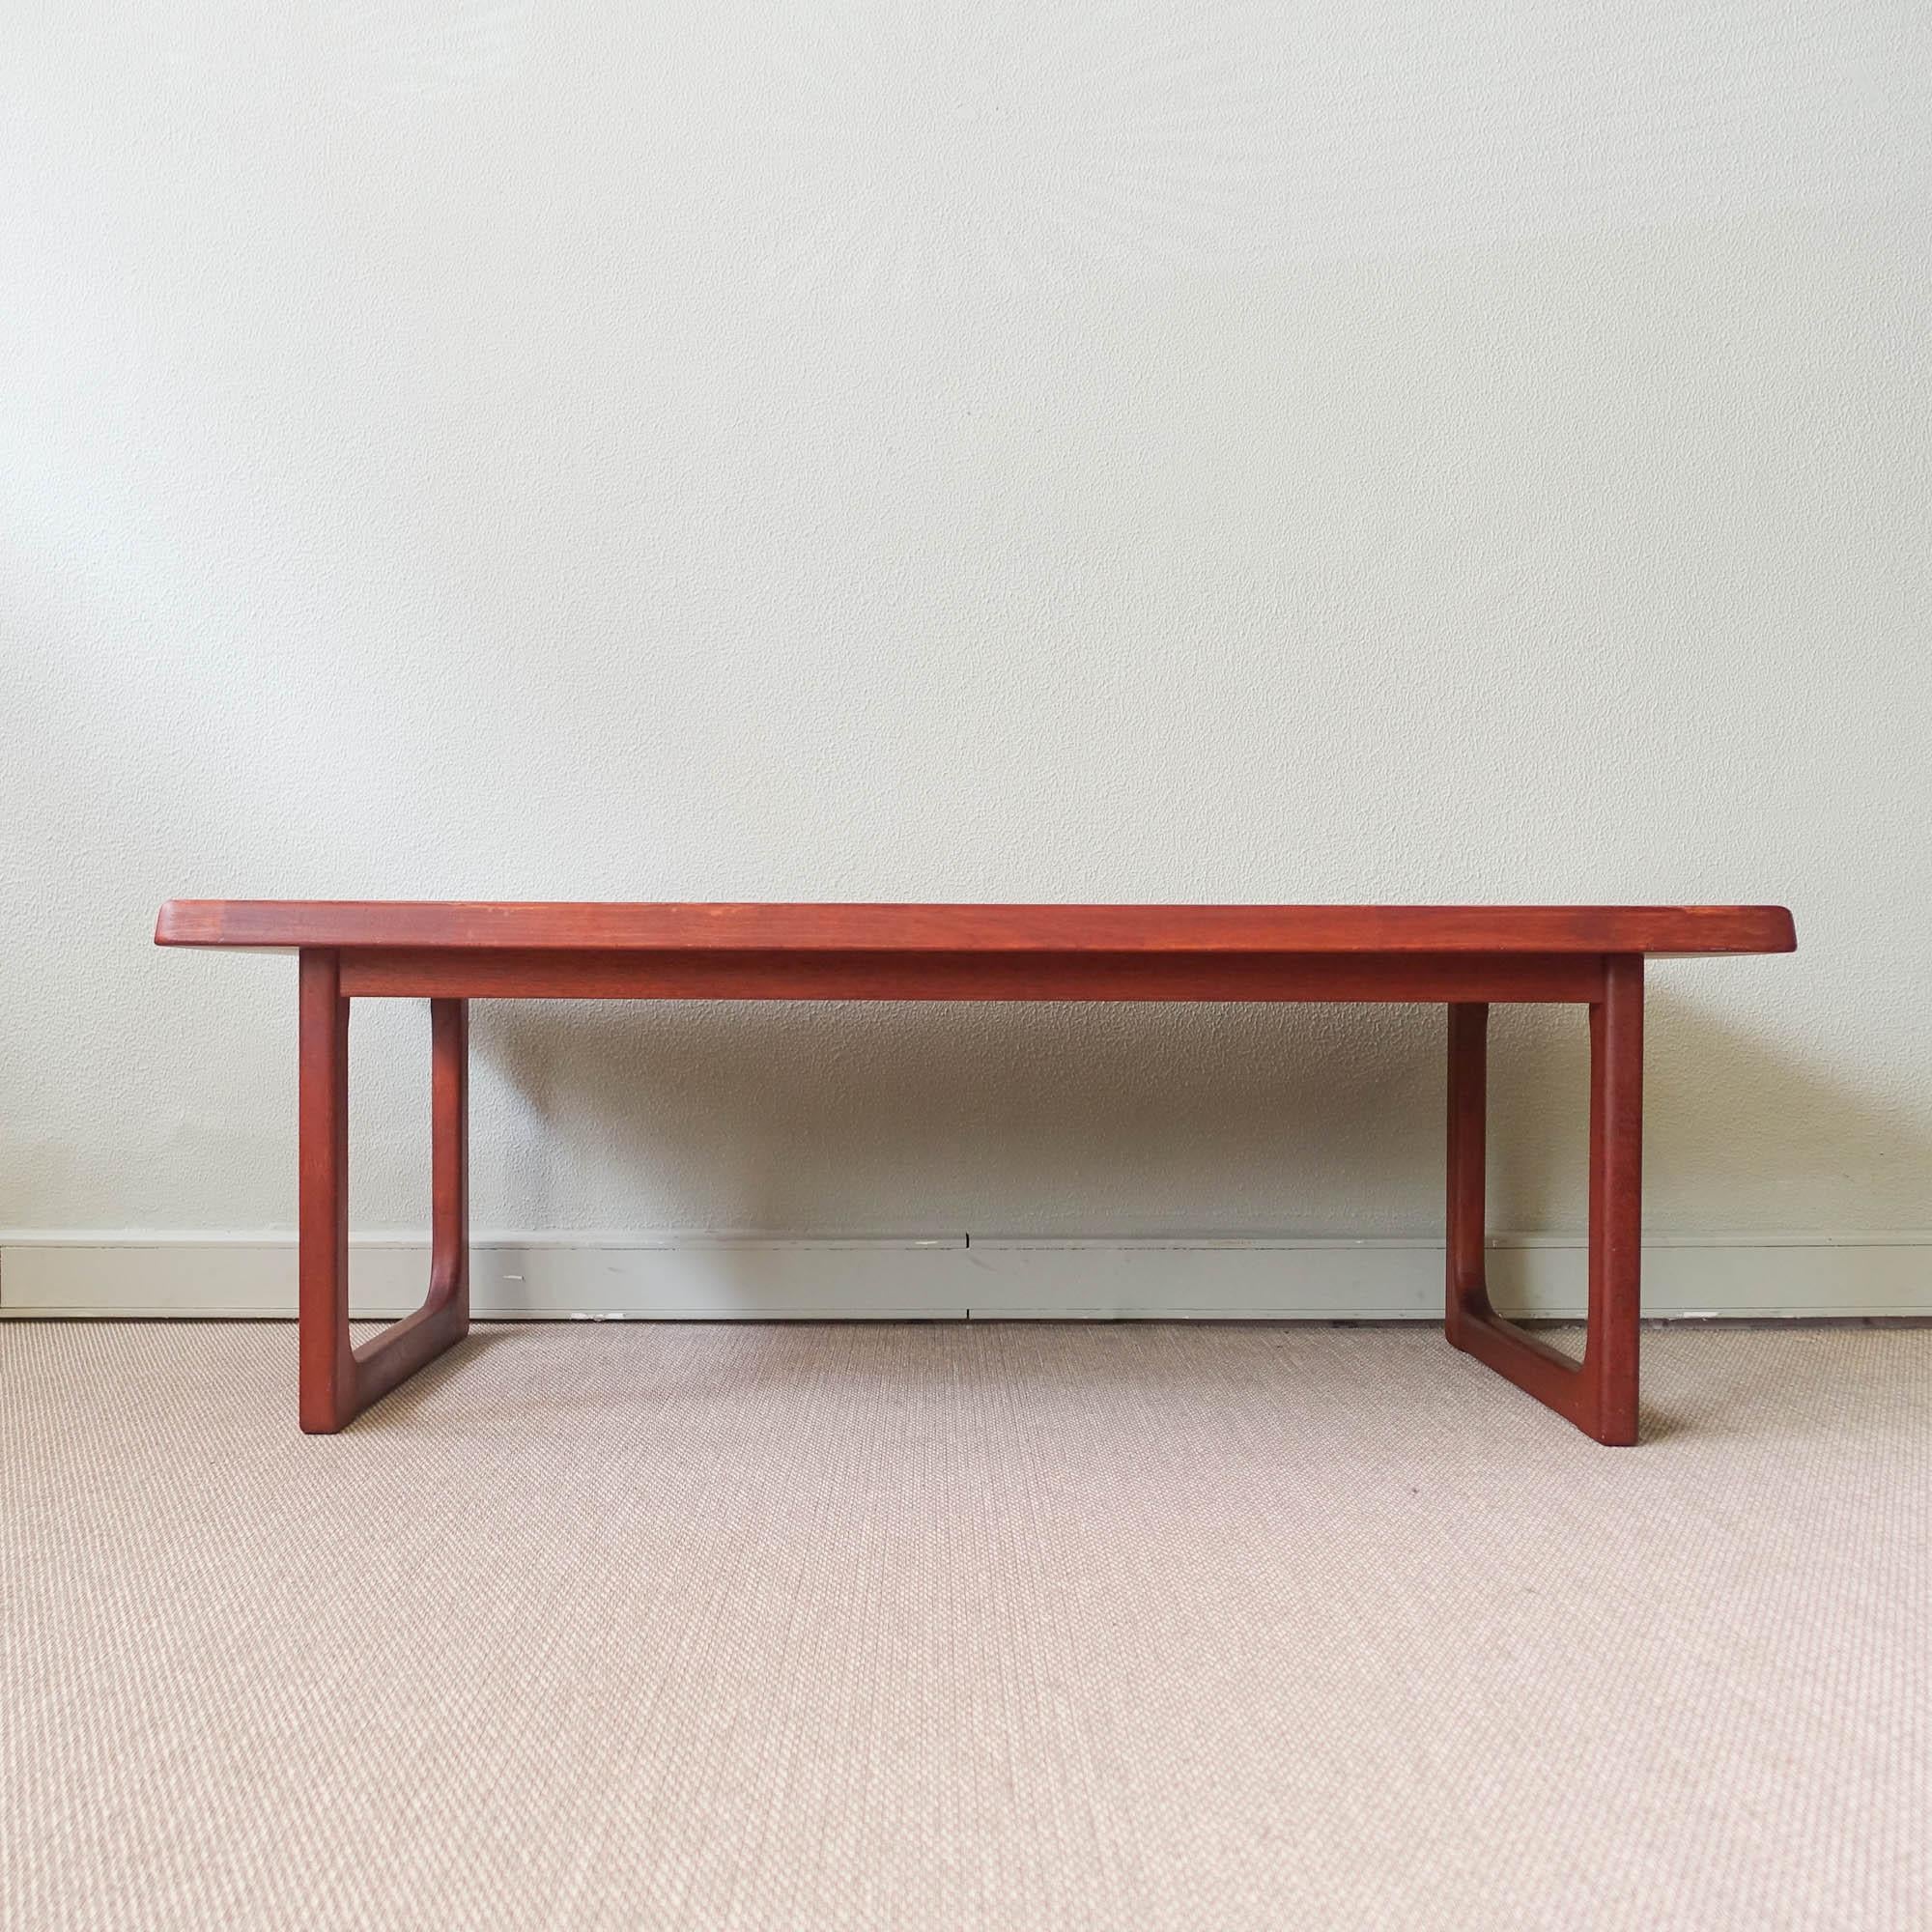 This coffee table was designed by Niels Bach and produced by Randers Denmark in Denmark, during the 1970's. It is made from solid teak with a rectangular table top with rounded corners and skid feet. All joinery has been reworked in the very